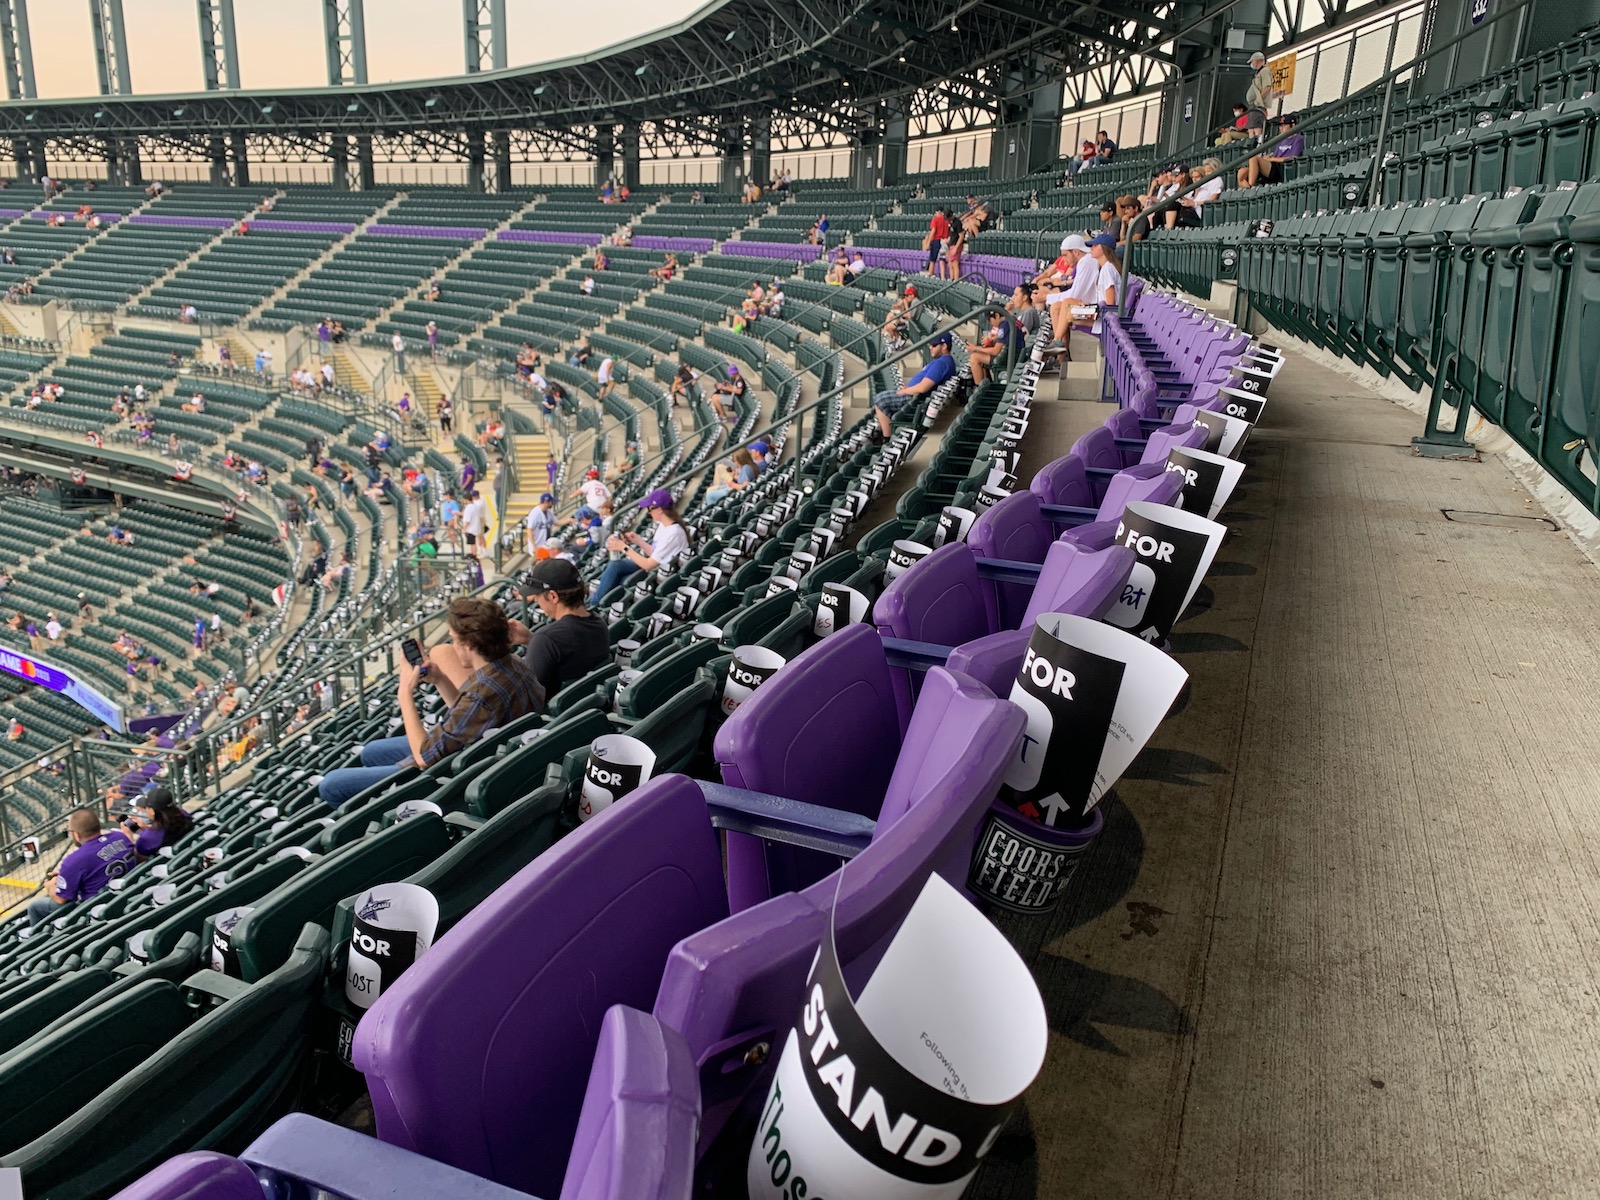 Coors Field Seating Chart, Coors Field